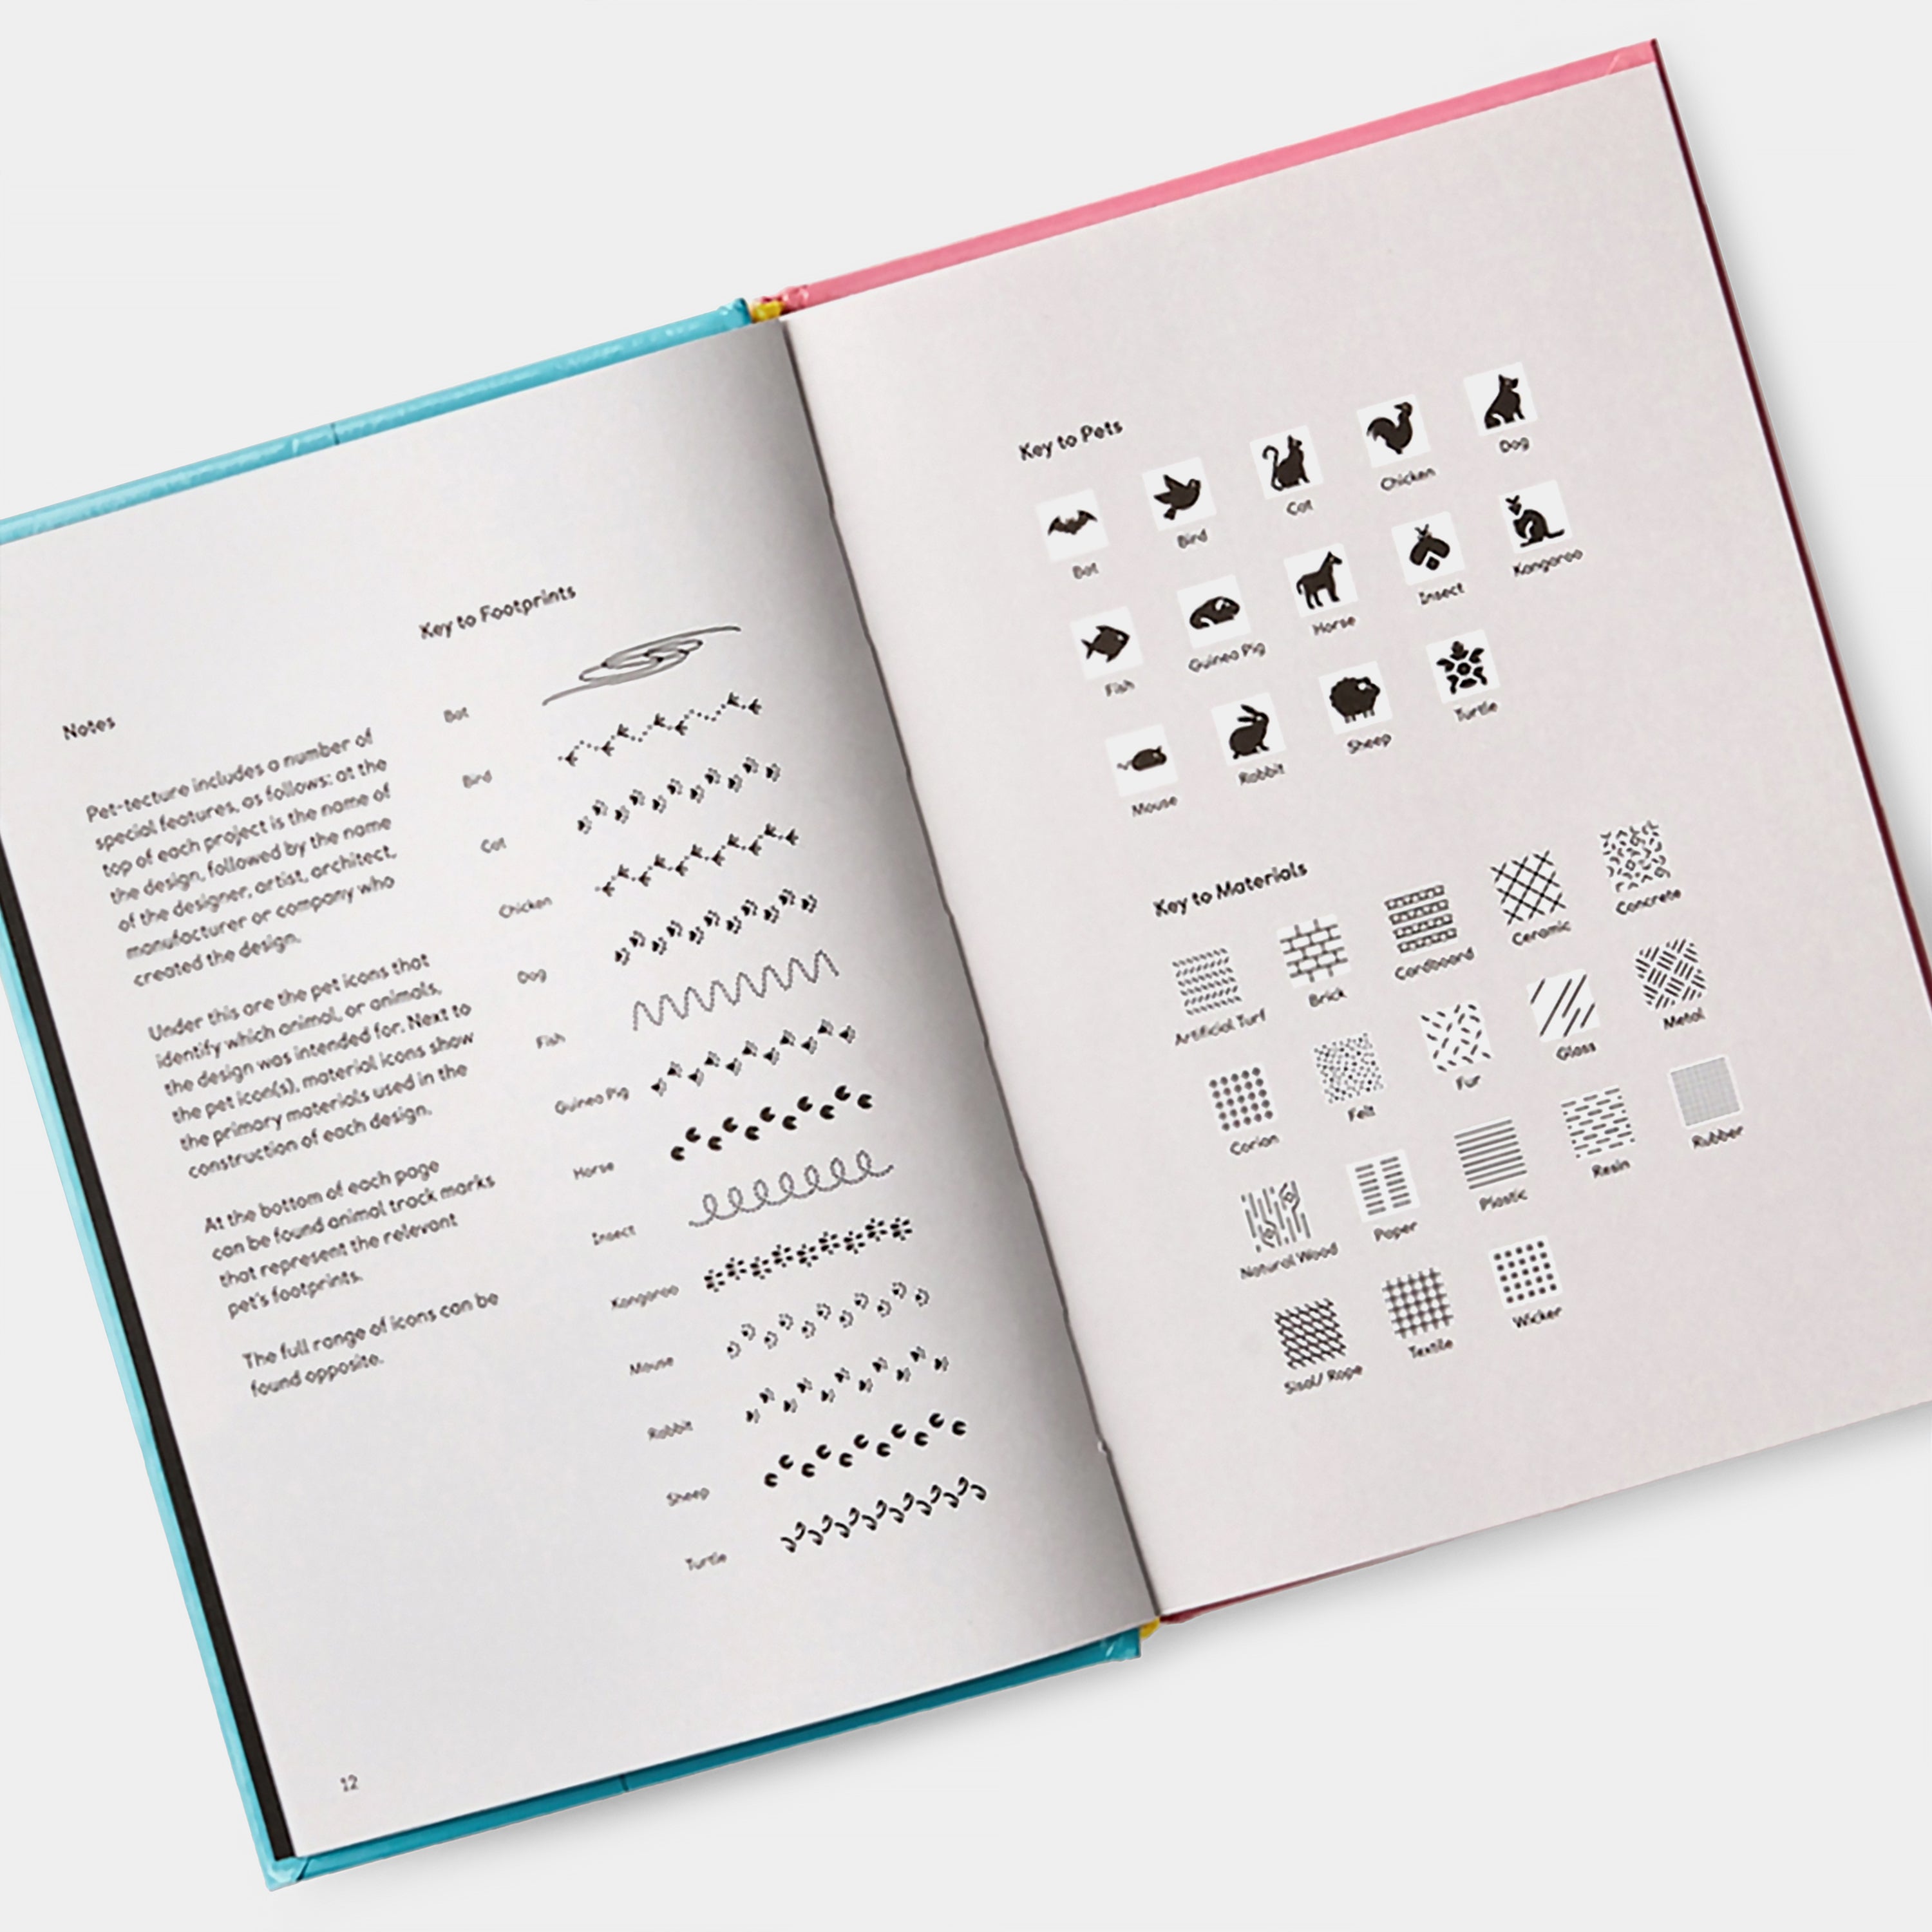 Pet-tecture: Design for Pets Phaidon Book